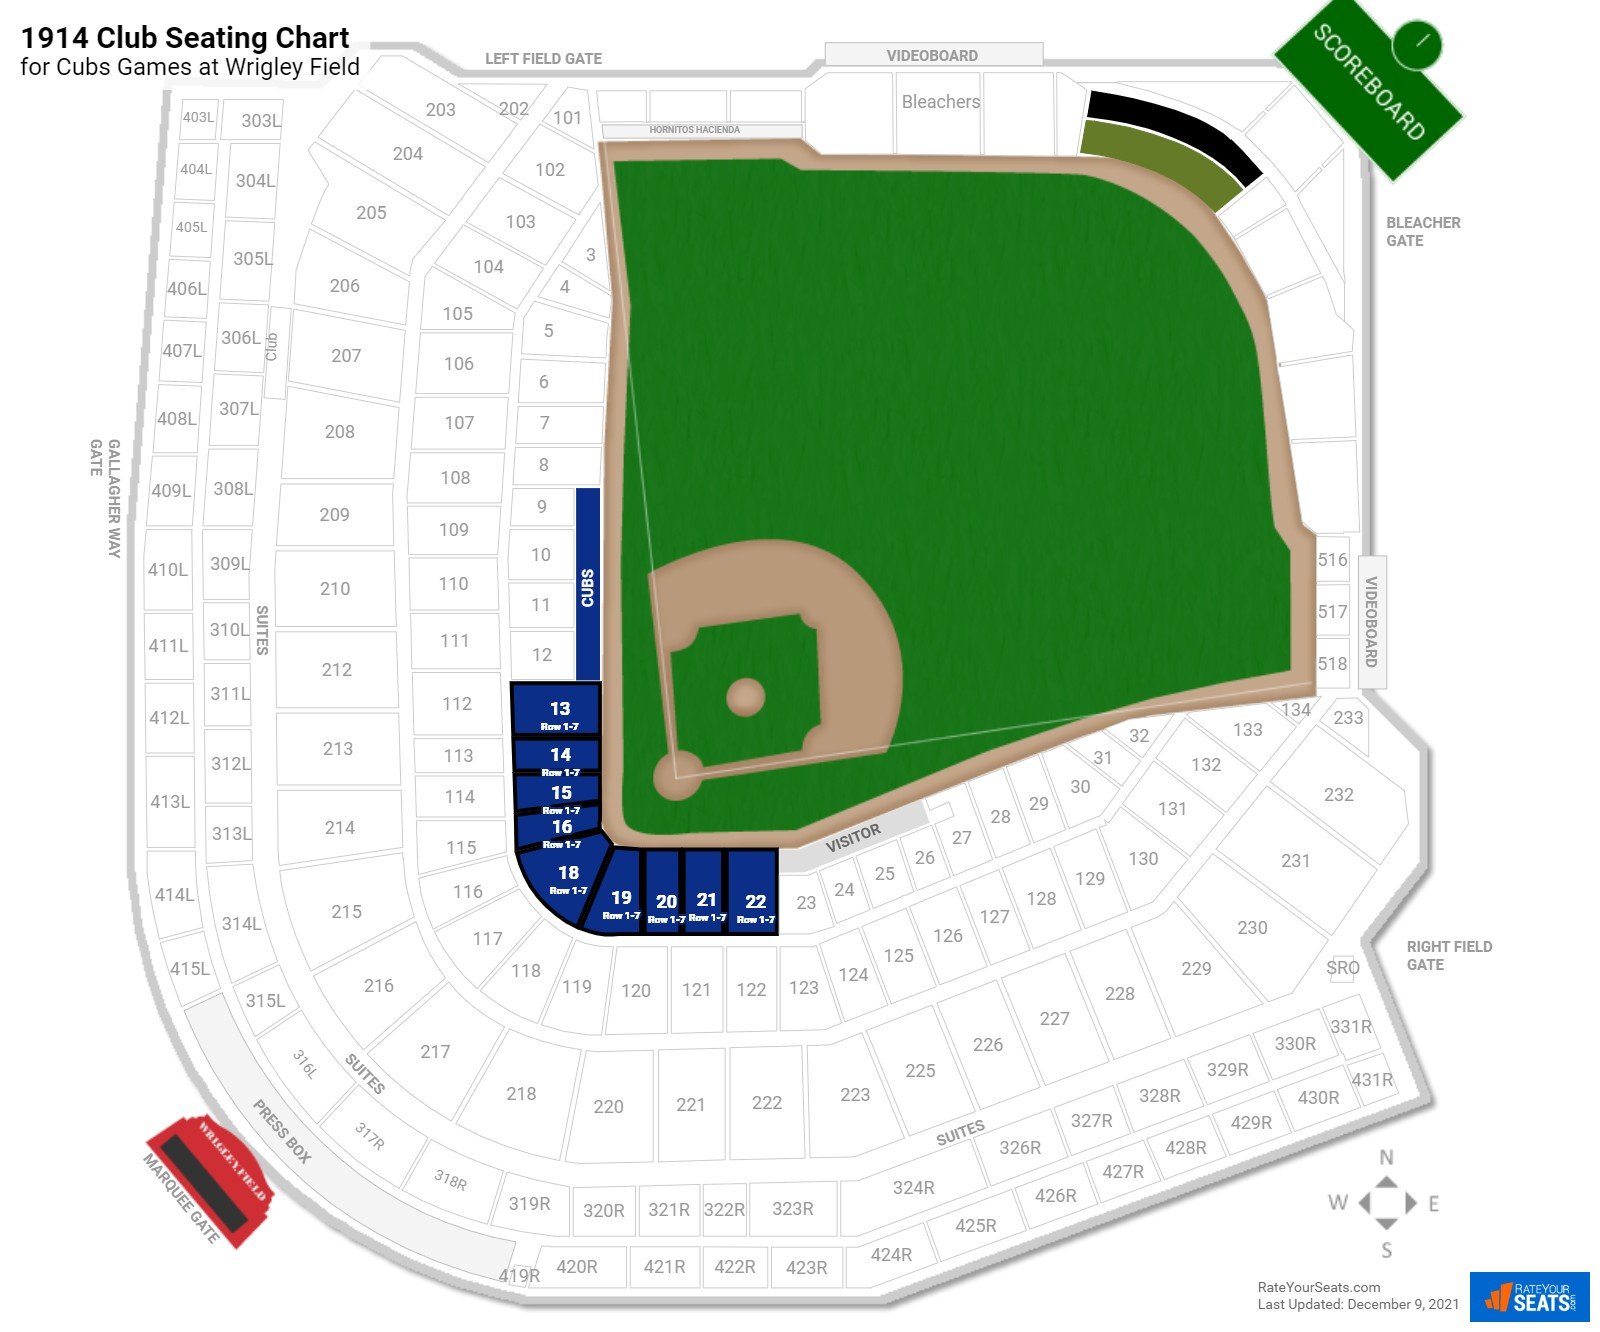 Cubs 1914 Club Seating Chart at Wrigley Field